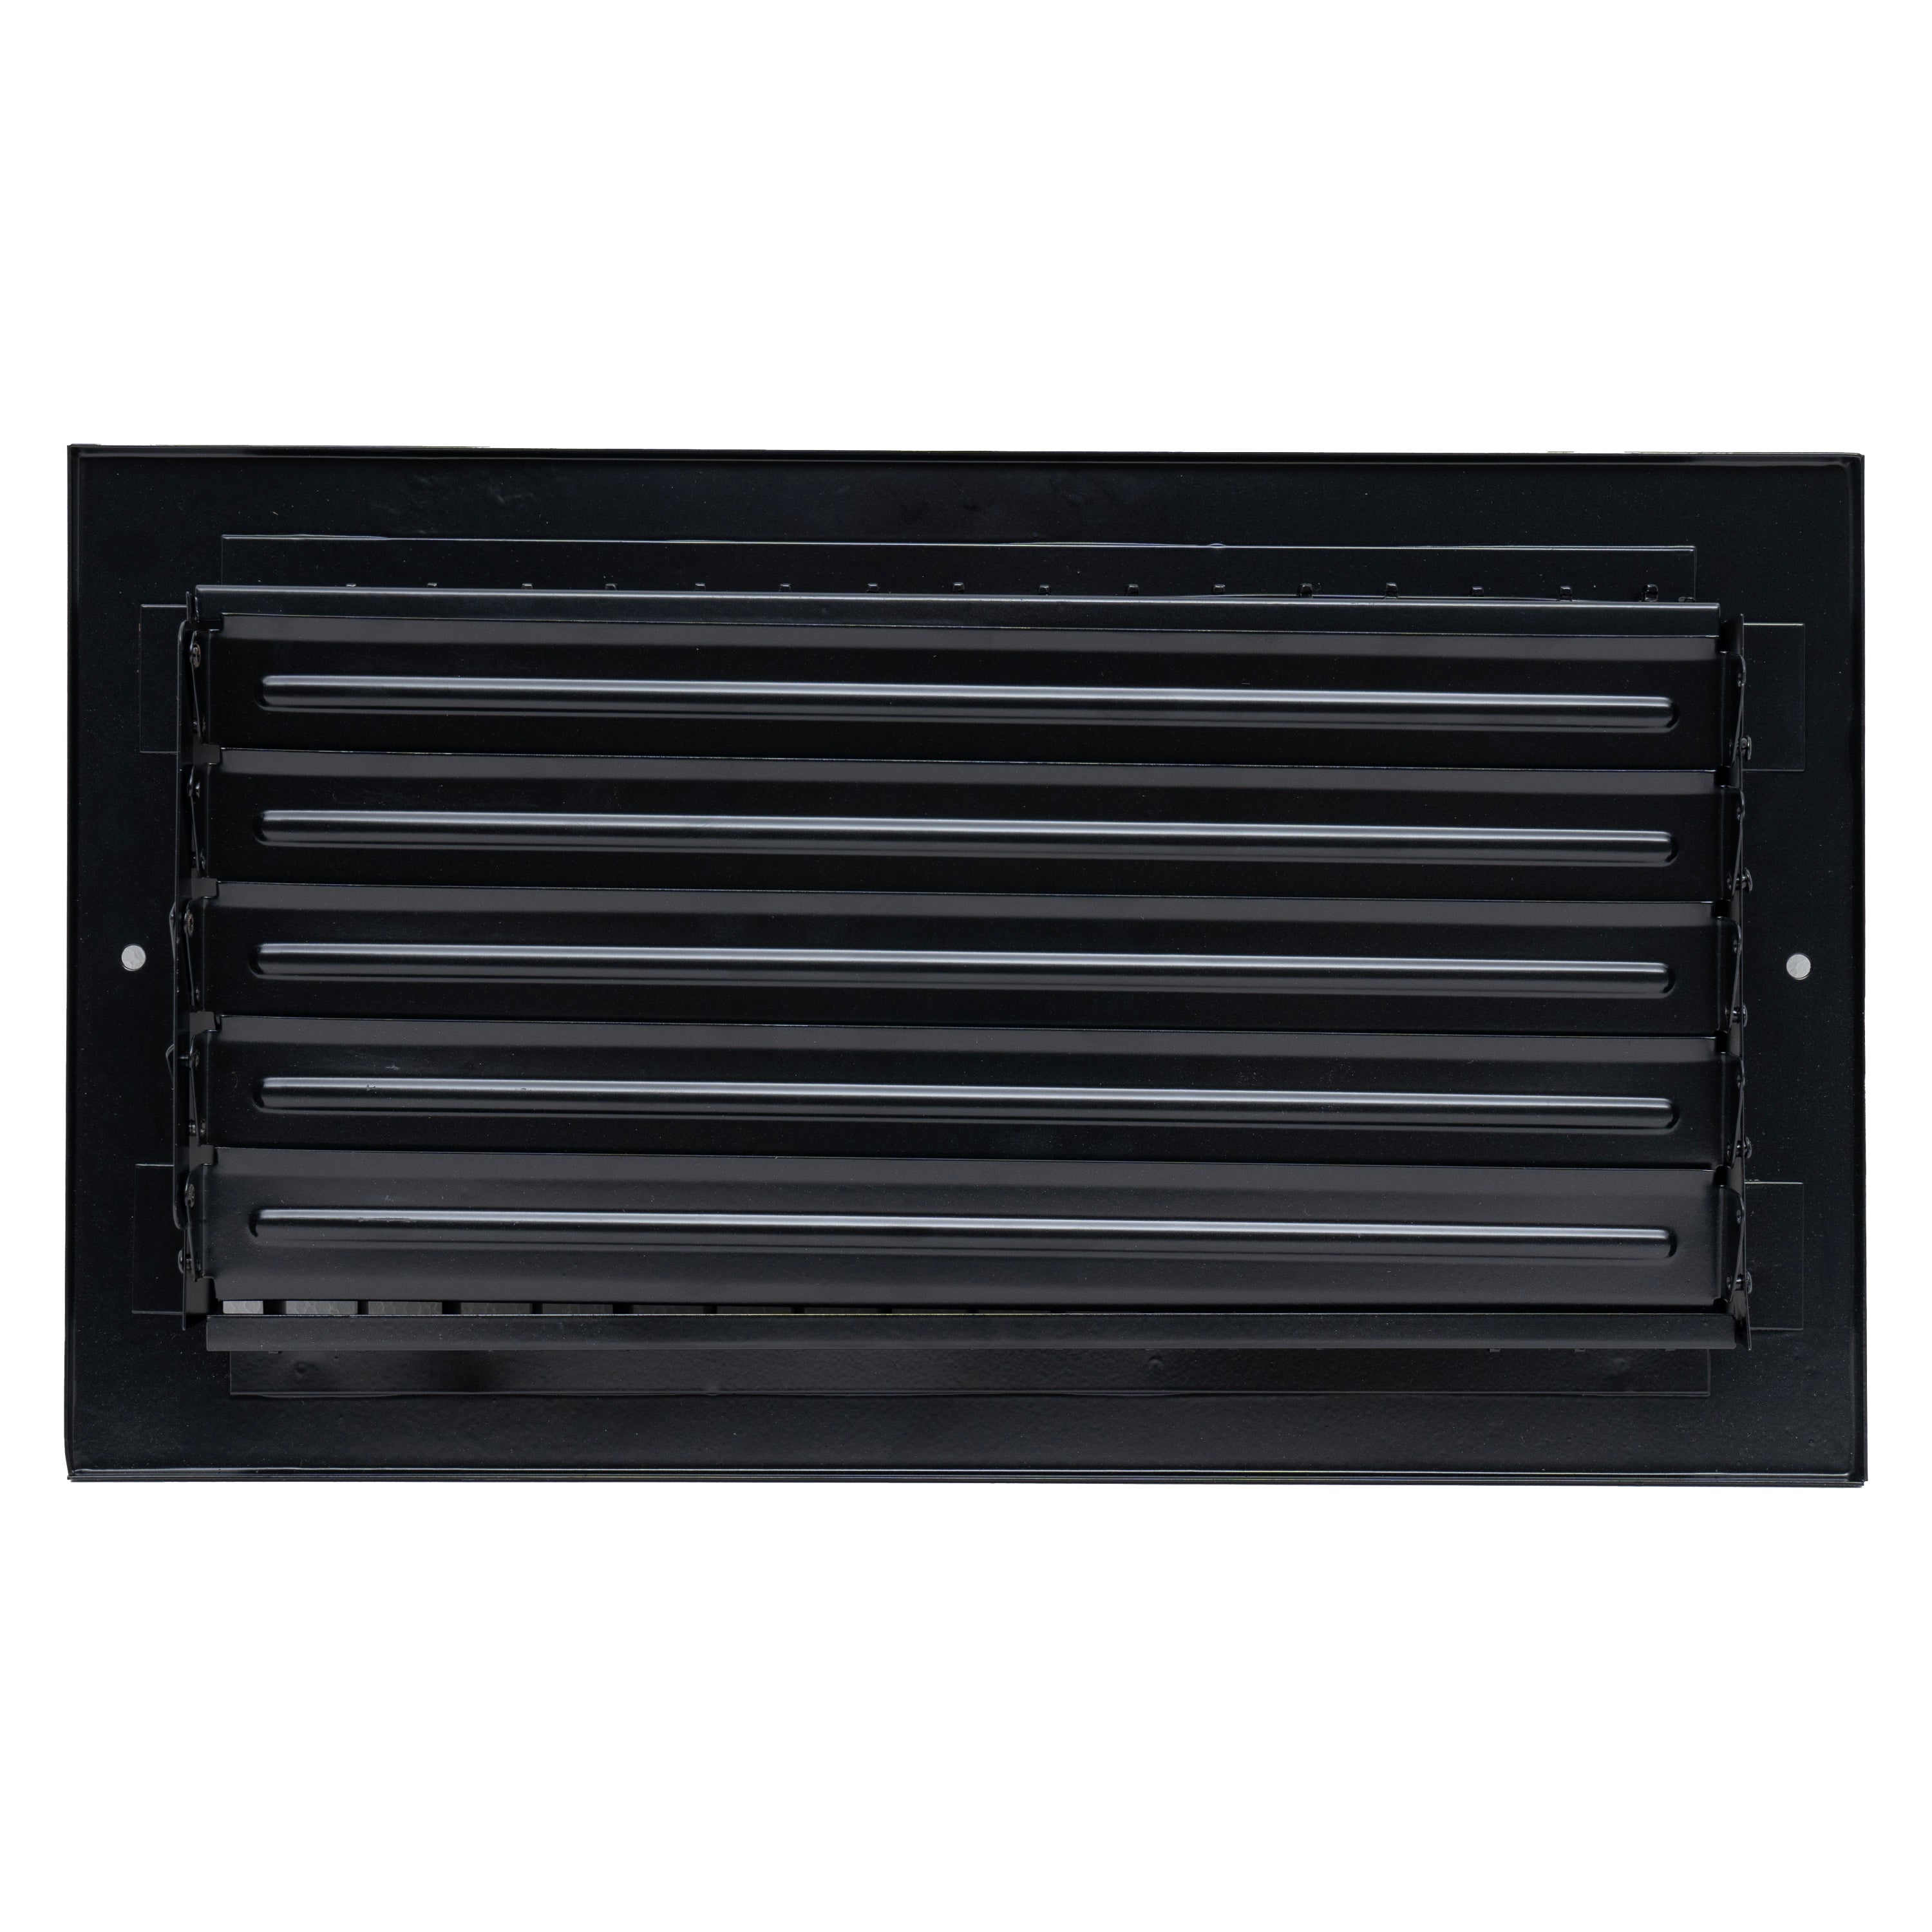 12"W x 6"H  Steel Adjustable Air Supply Grille | Register Vent Cover Grill for Sidewall and Ceiling | Black | Outer Dimensions: 13.75"W X 7.75"H for 12x6 Duct Opening